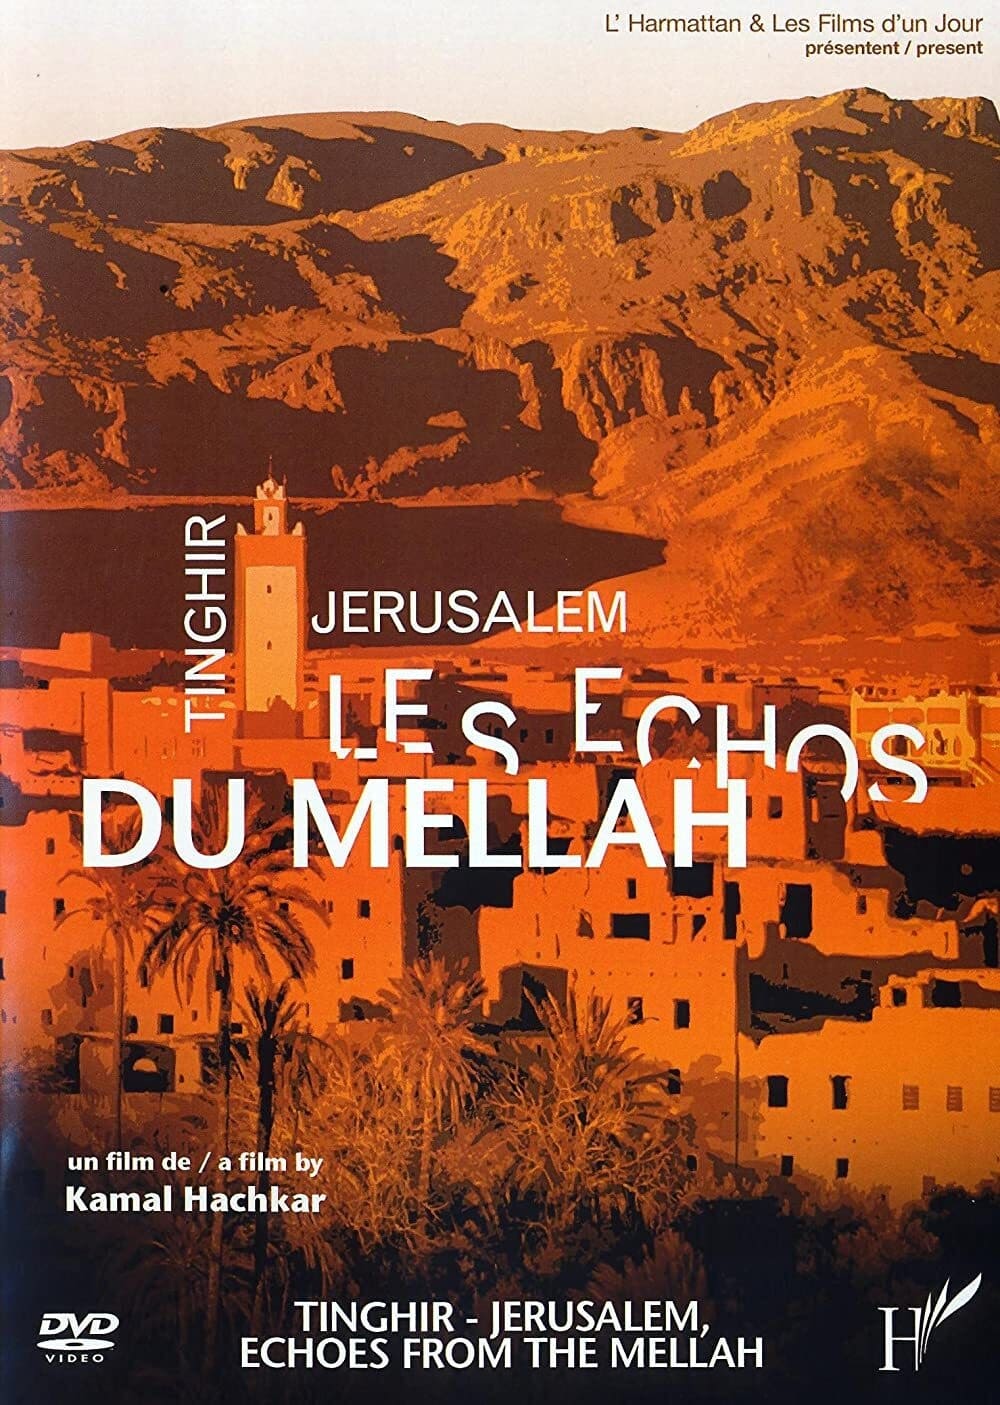 Tinghir-Jerusalem: Echoes from the Mellah